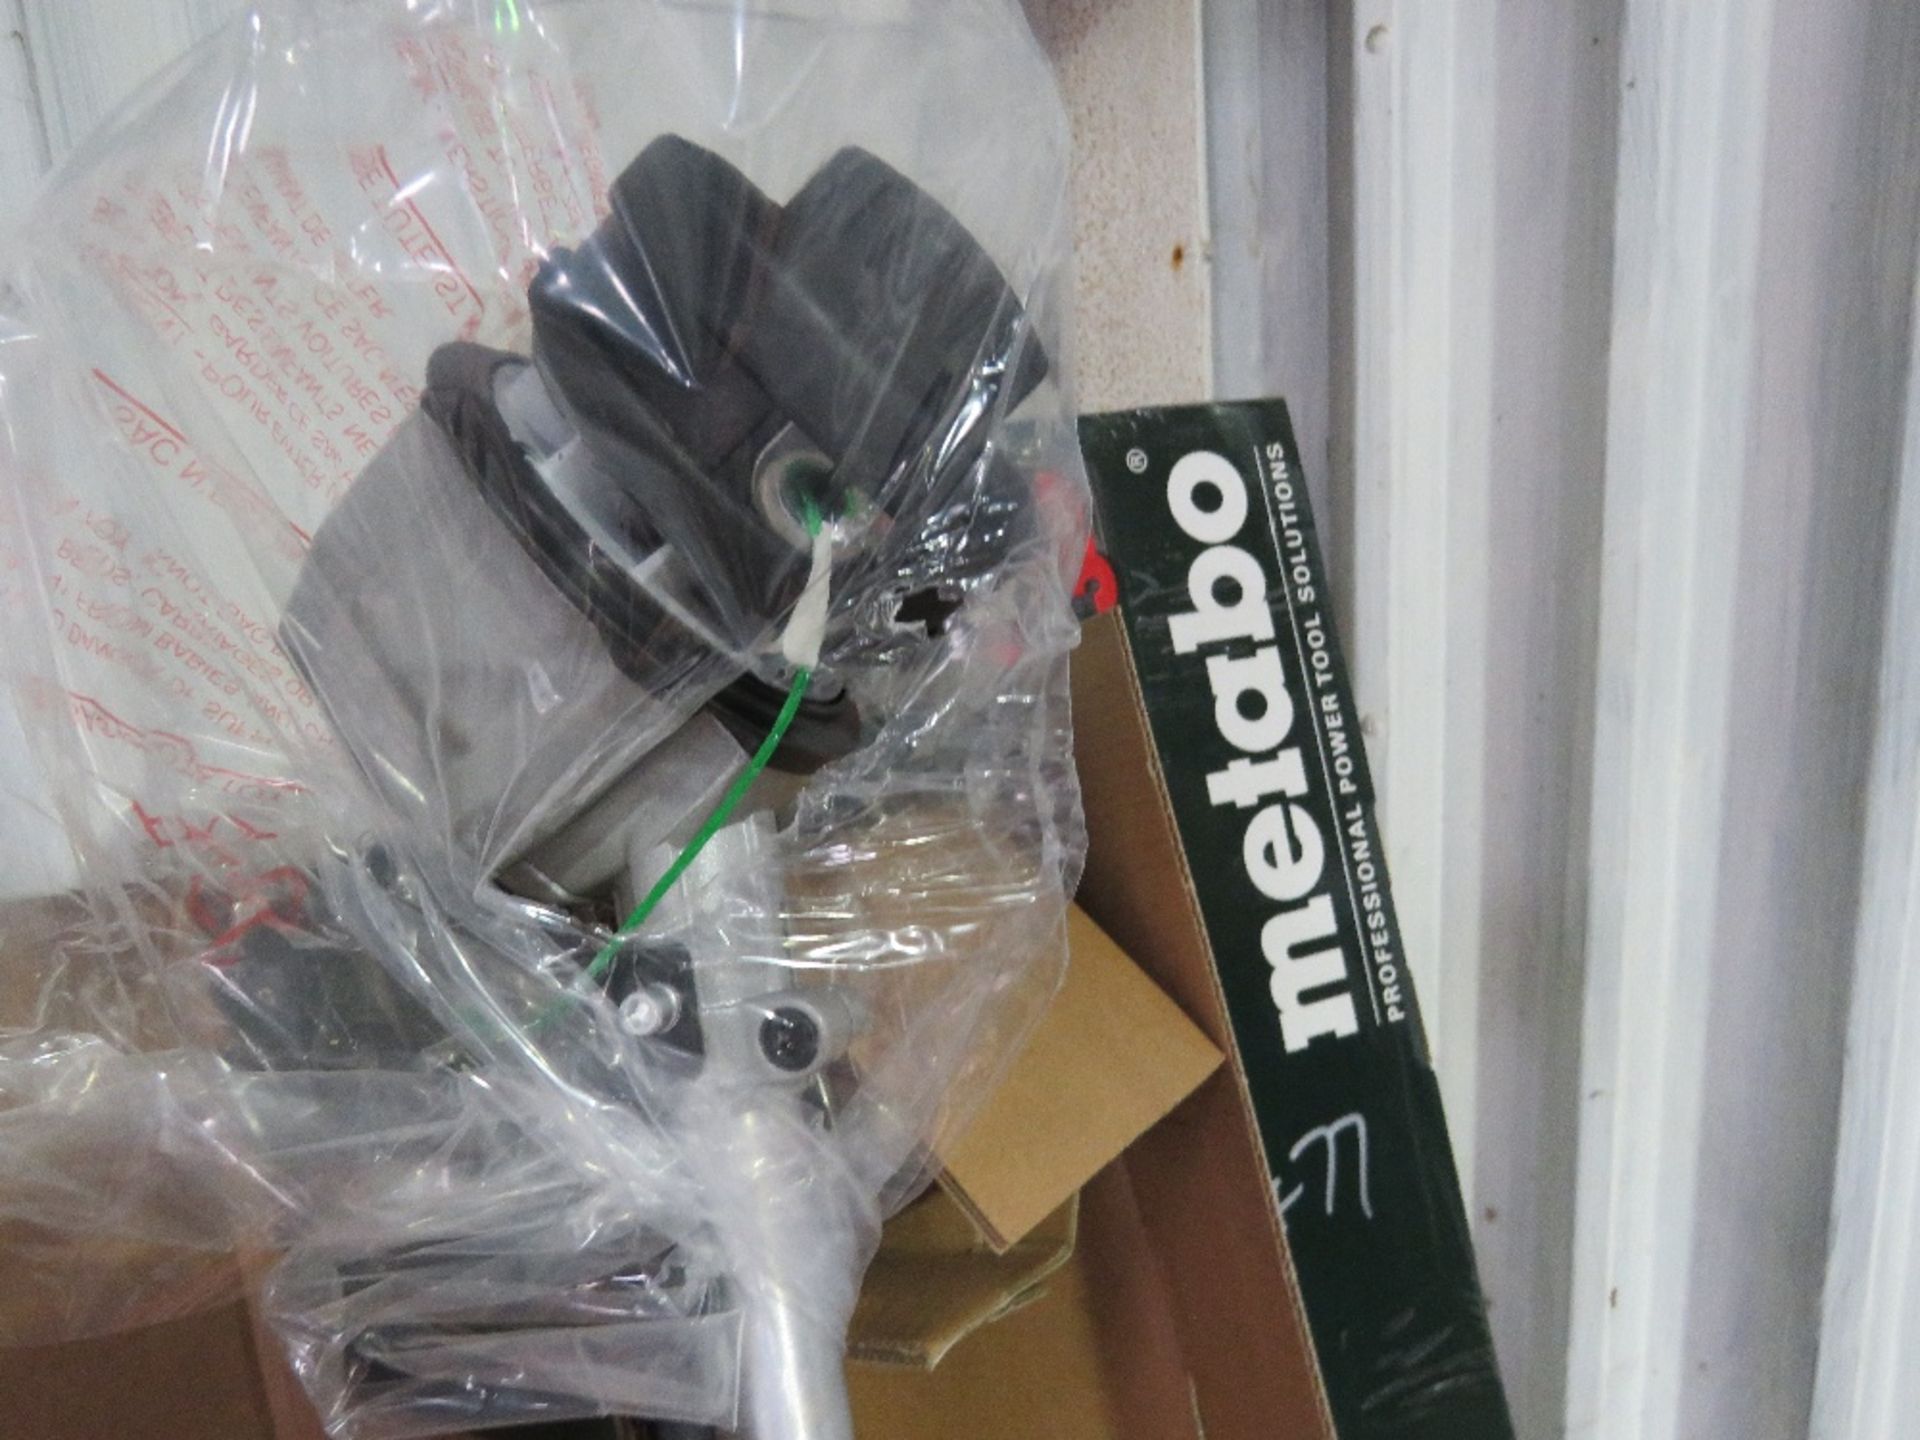 2 X METABO FSB 36-18 BATTERY POWERED STRIMMERS, BOXED, UNUSED (NO BATTERIES OR CHARGERS) - Image 2 of 3